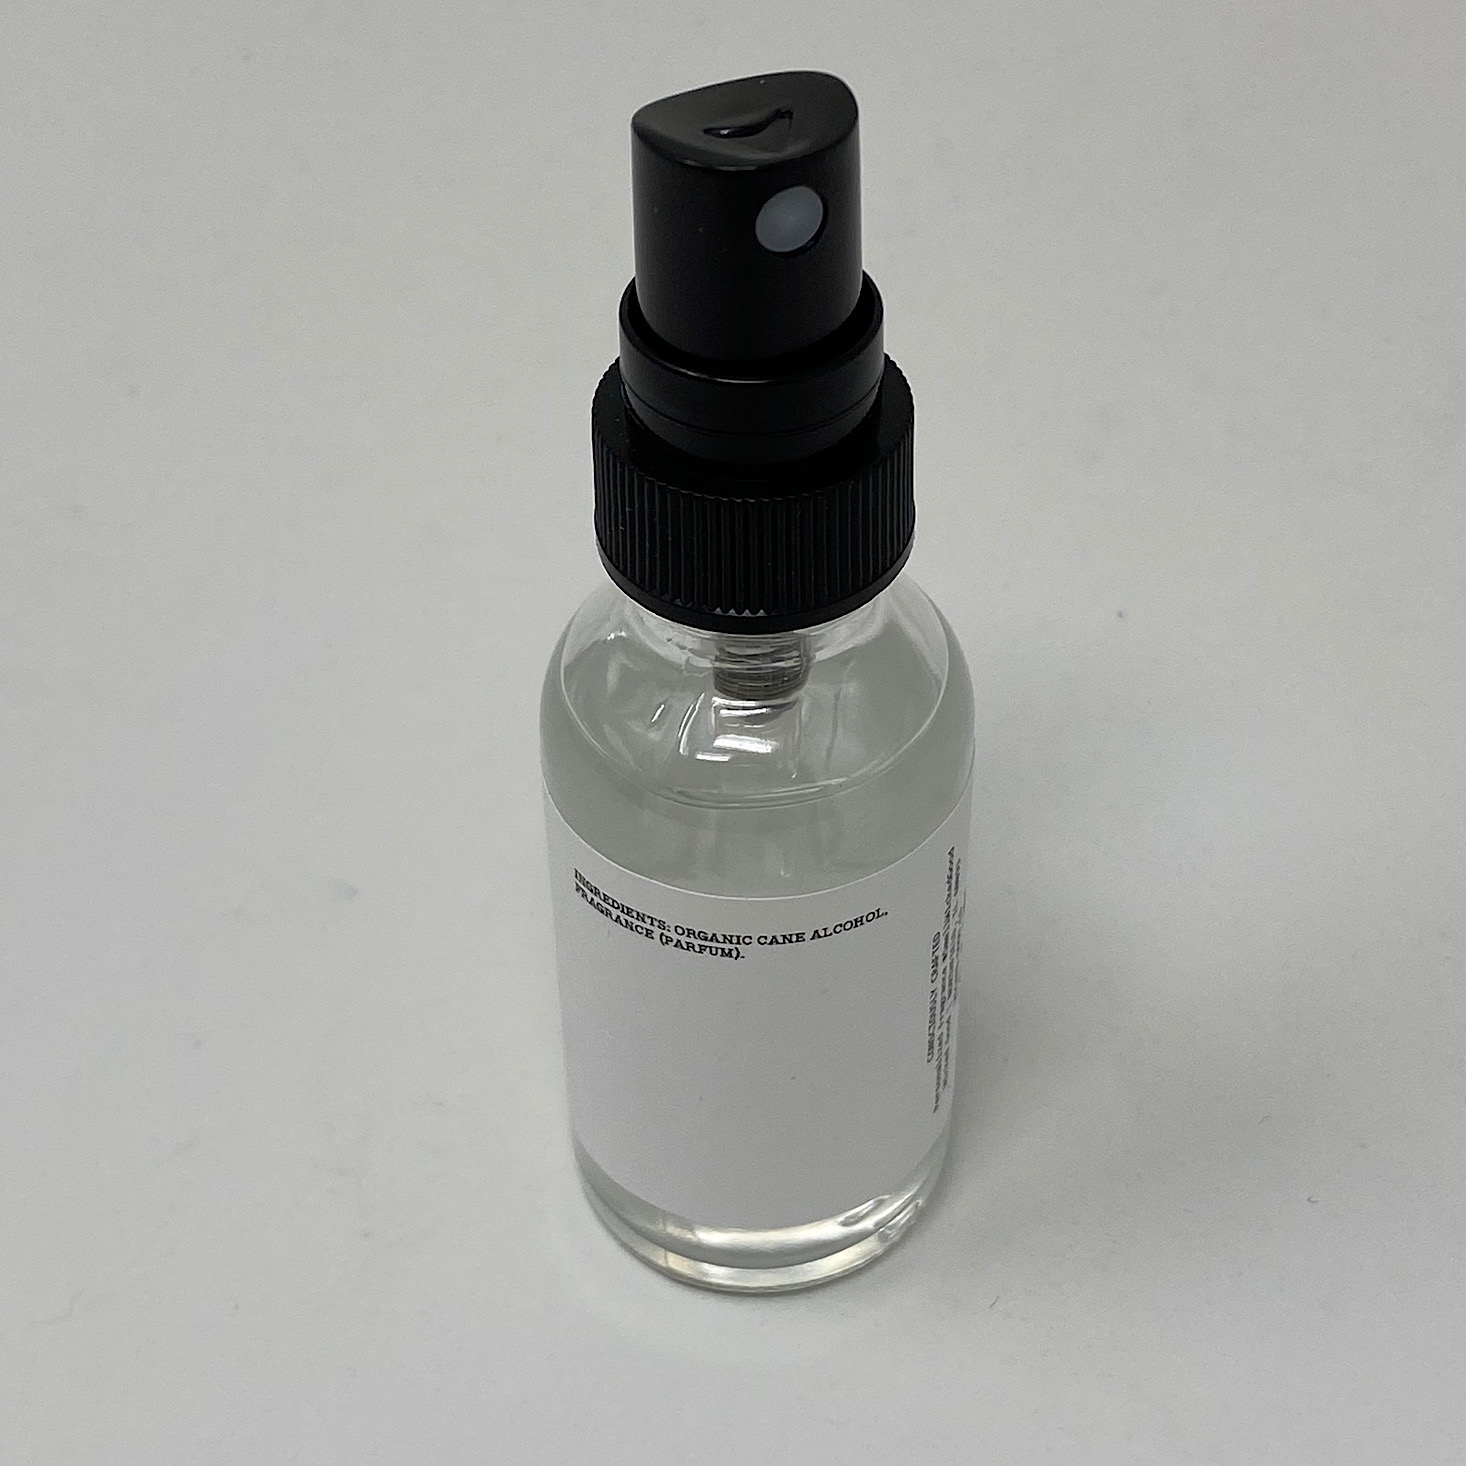 Wicked Good Perfume Review - June 2020 | MSA